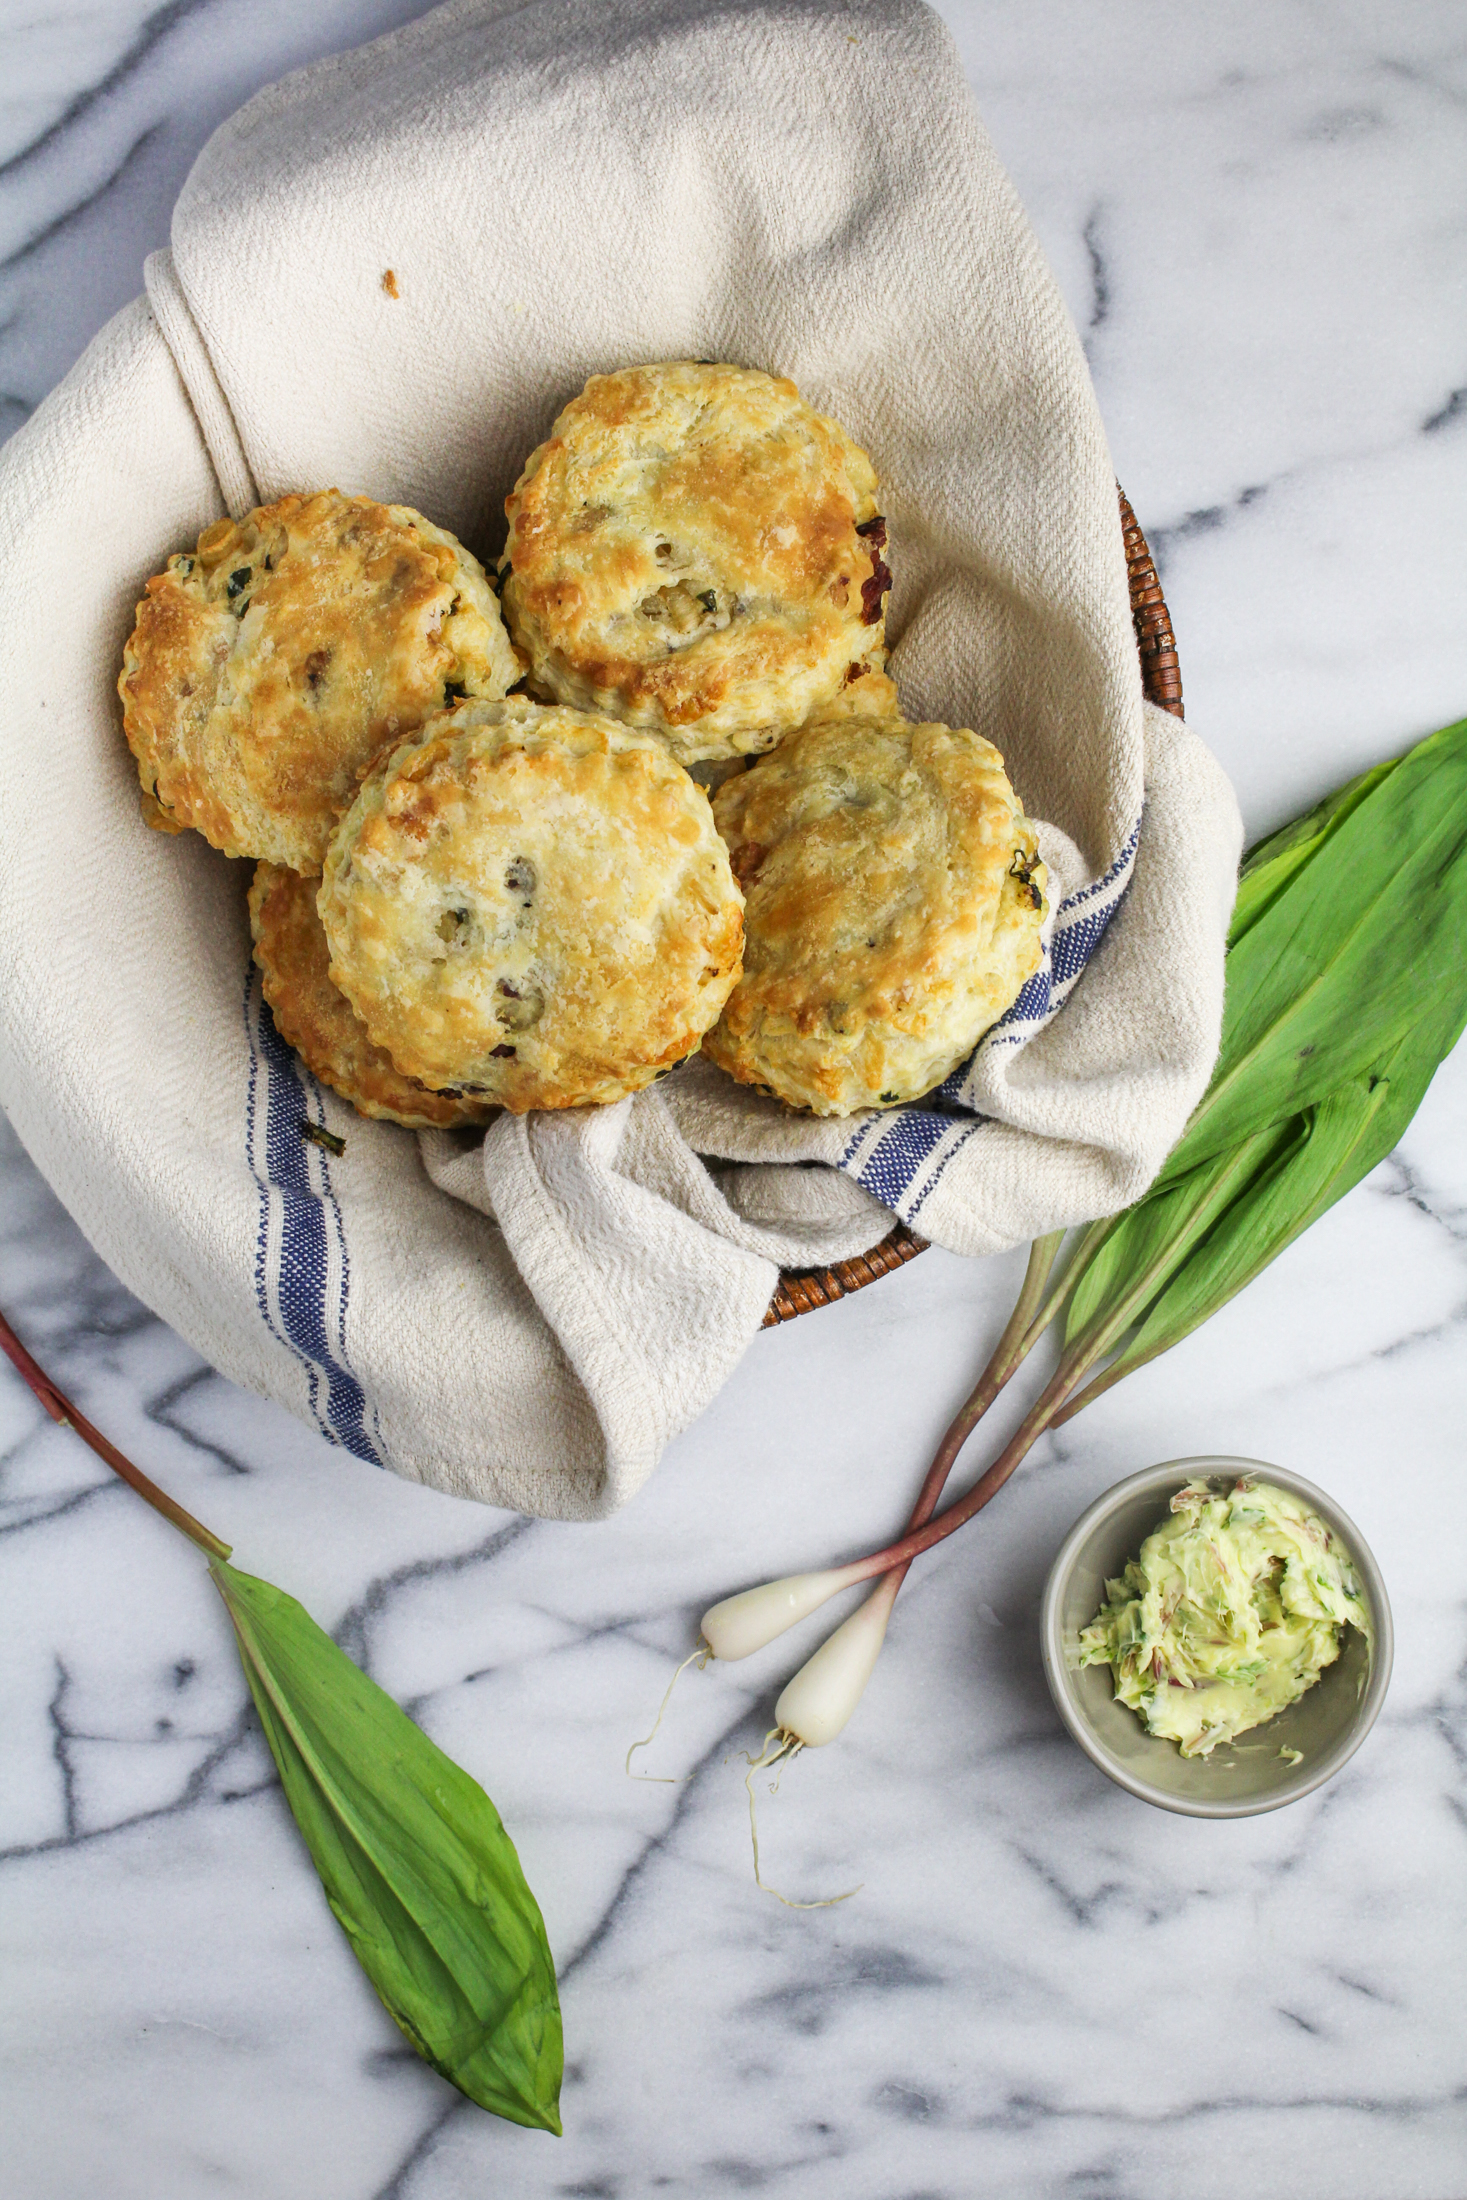 Ramp, Bacon, and Cheddar Buttermilk Biscuits